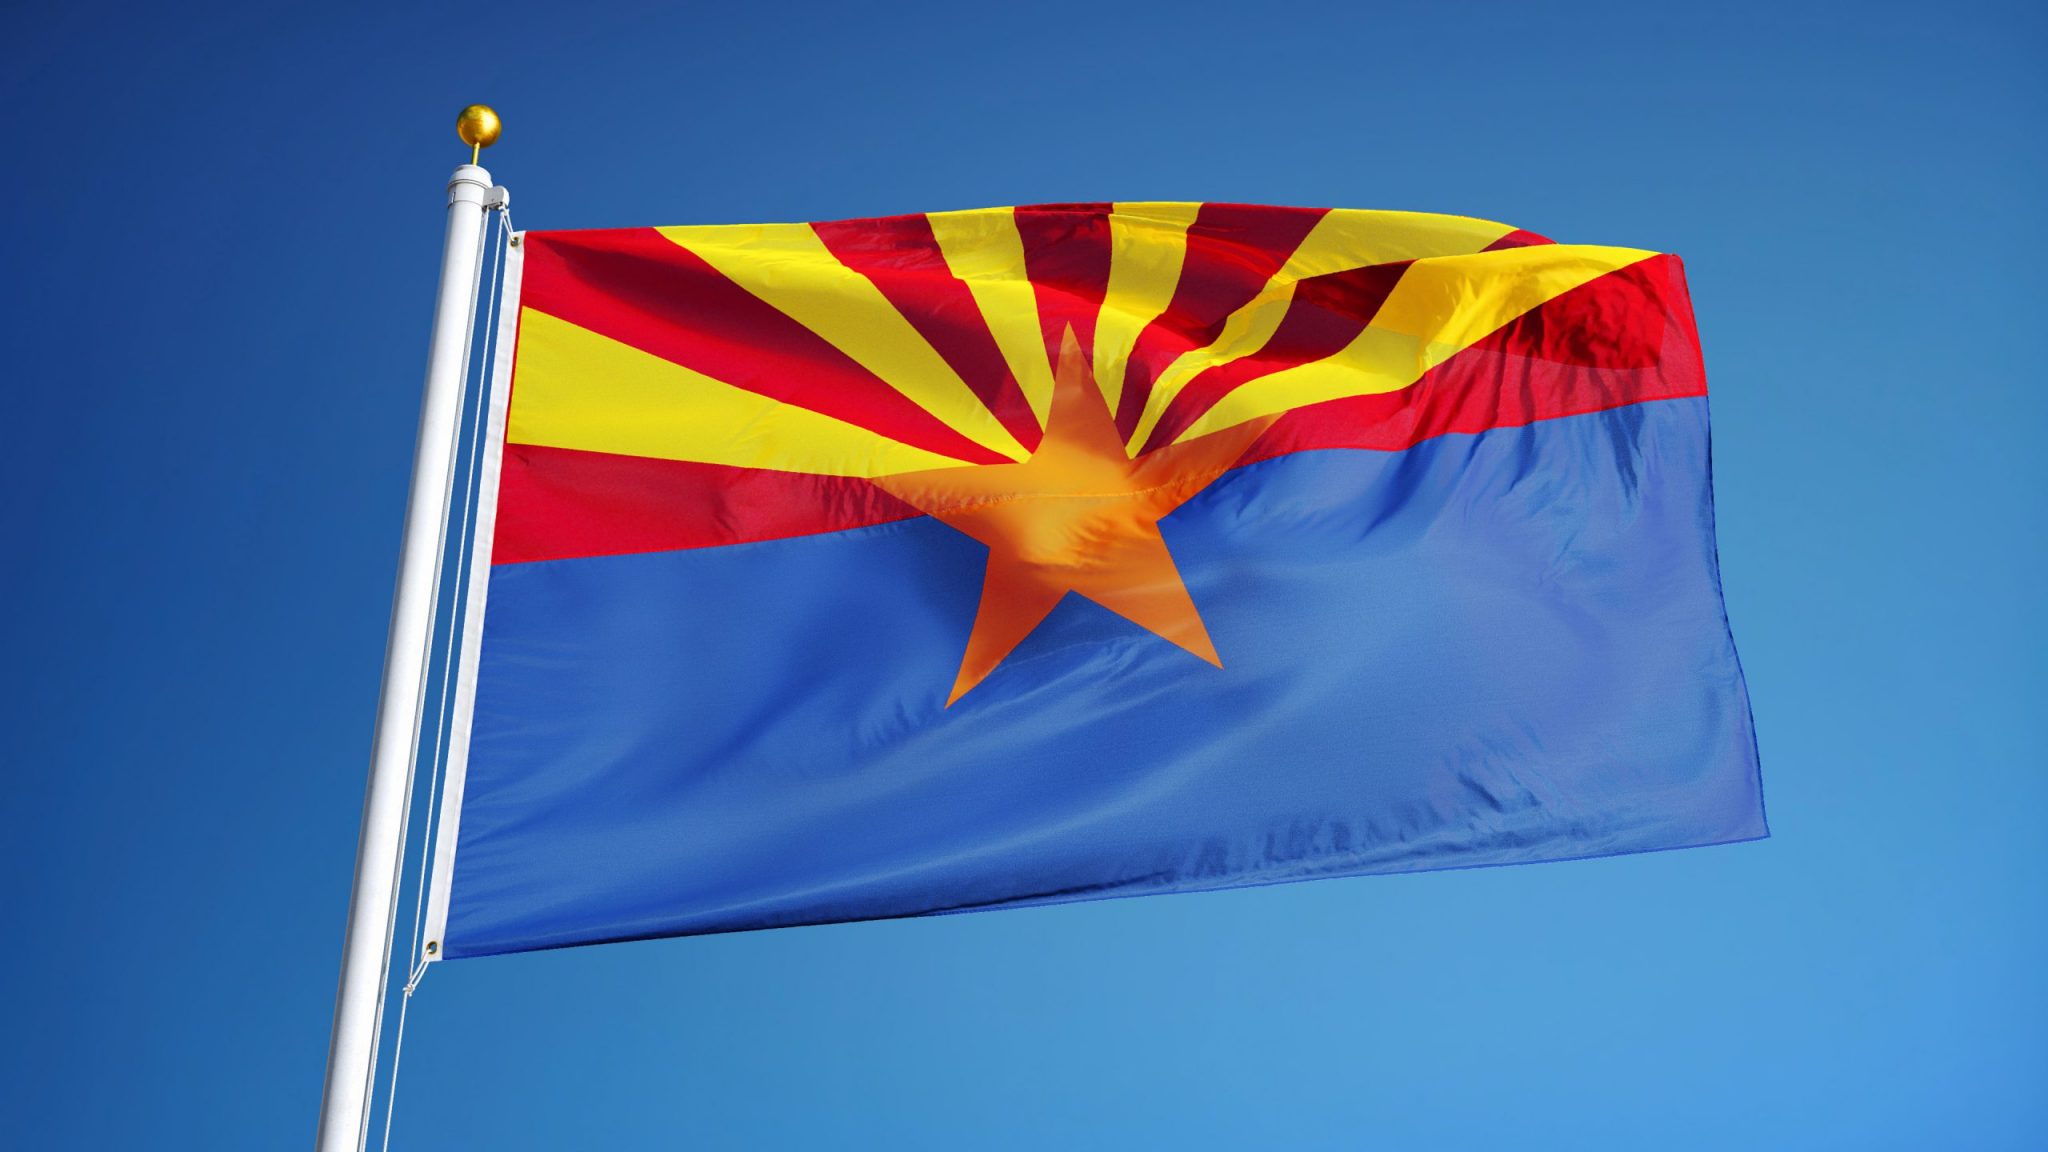 Arizona (U.S. state) flag waving against clear blue sky, close up, isolated with clipping path mask alpha channel transparency, perfect for film, news, composition